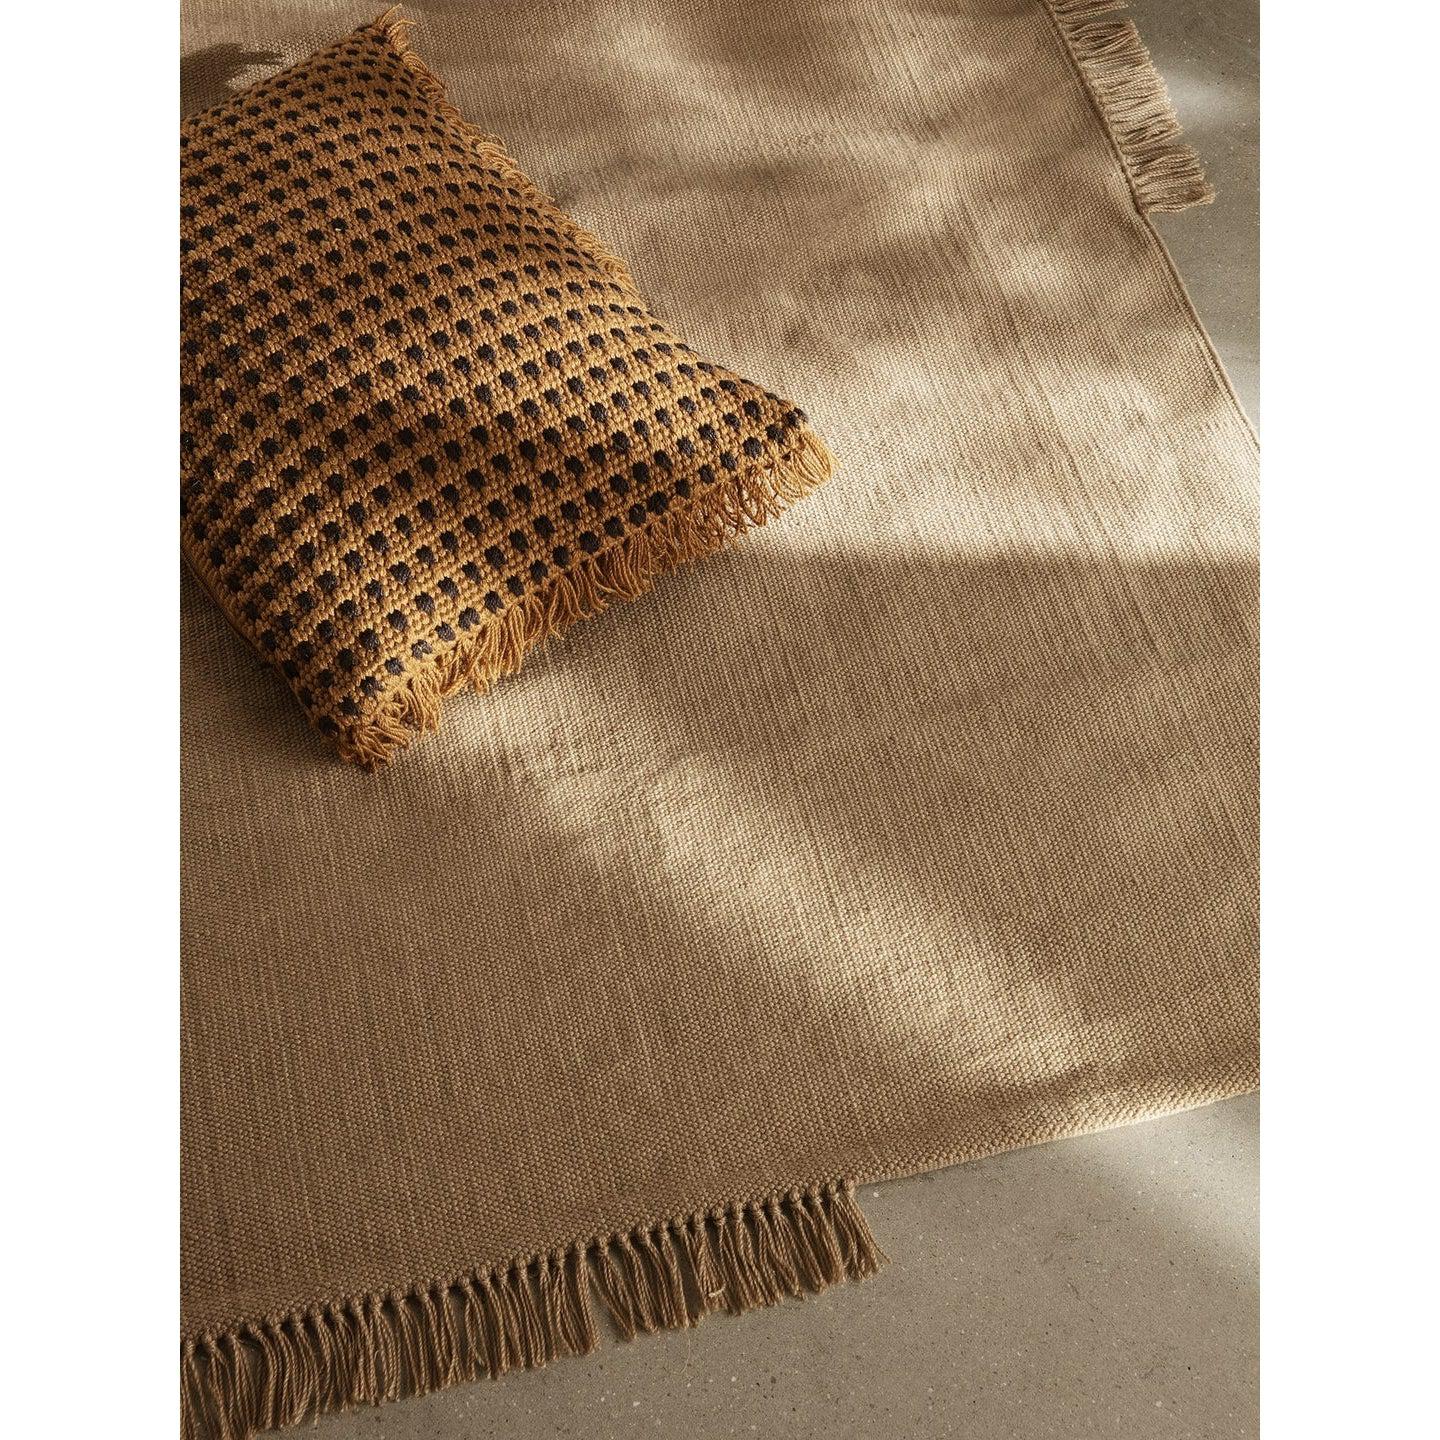 Rugs by Roo | ferm Living Hem Rug Small Area Rug-1104263898